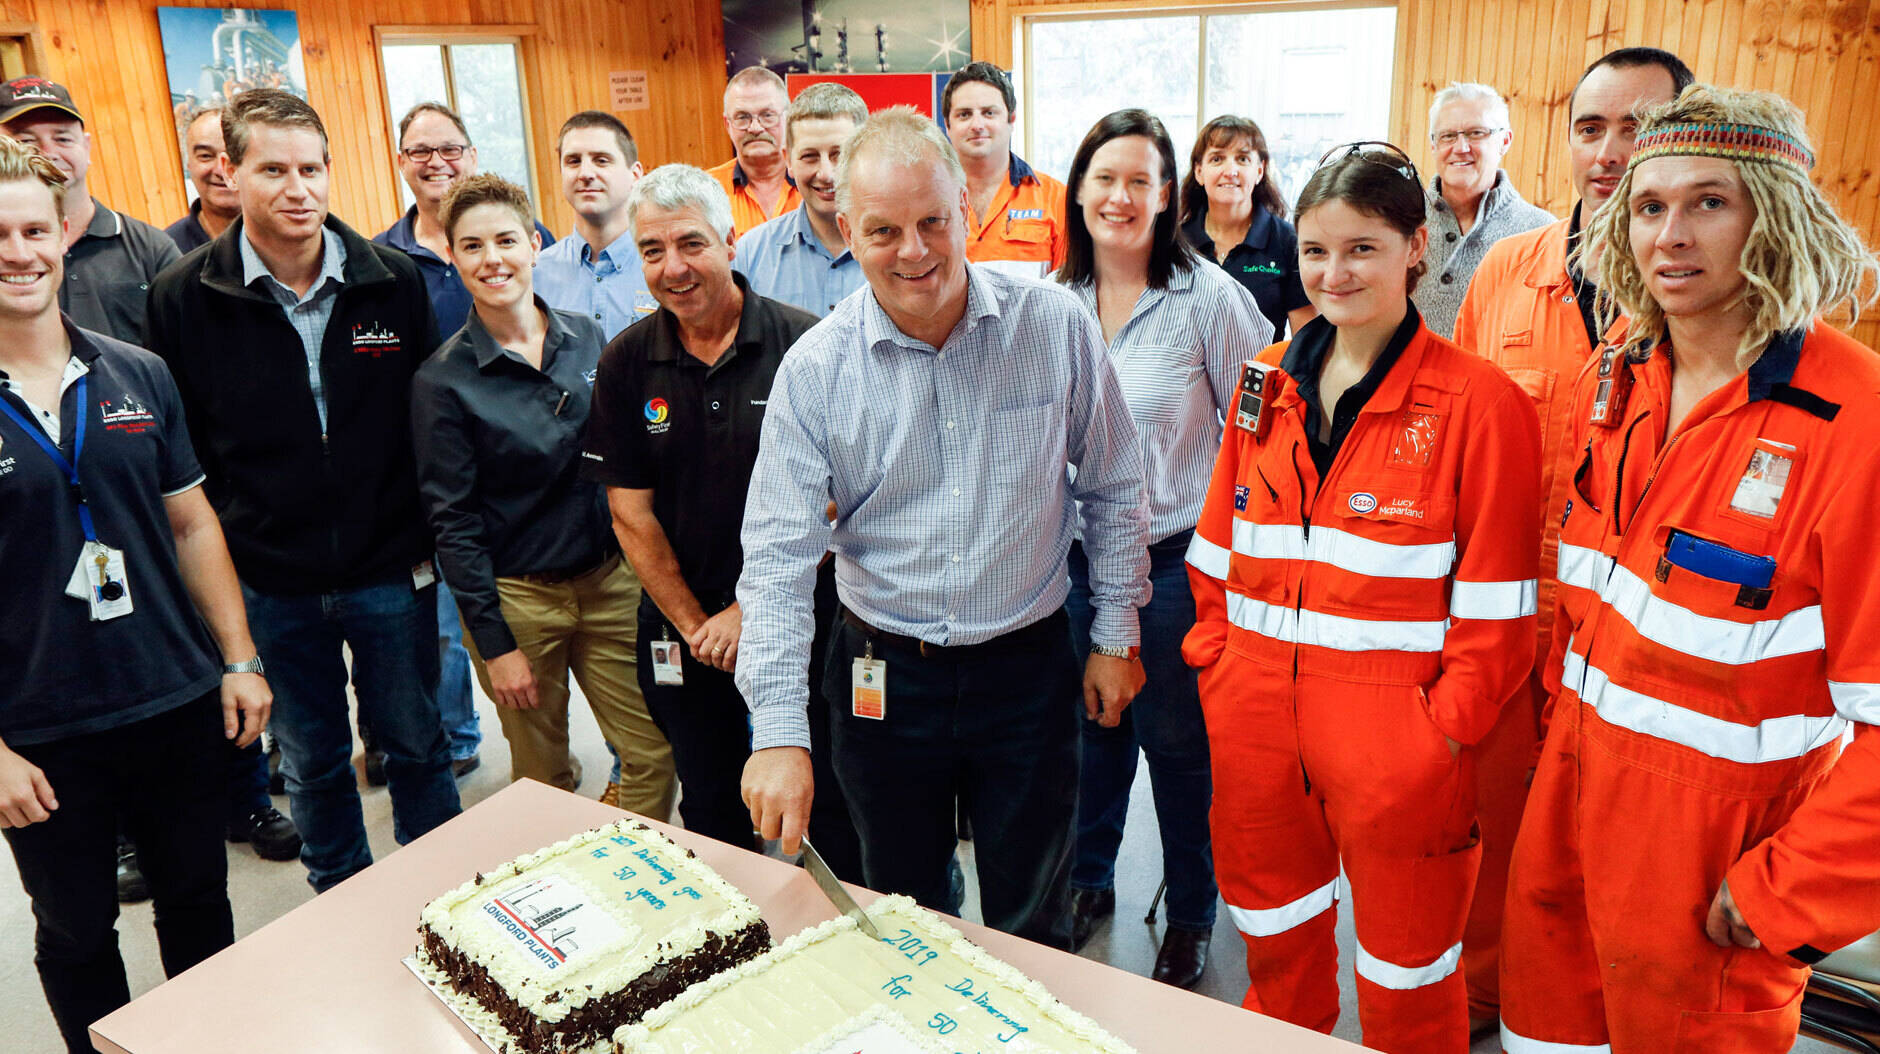 Image Photo The Longford Plants team celebrate the 50 year anniversary.